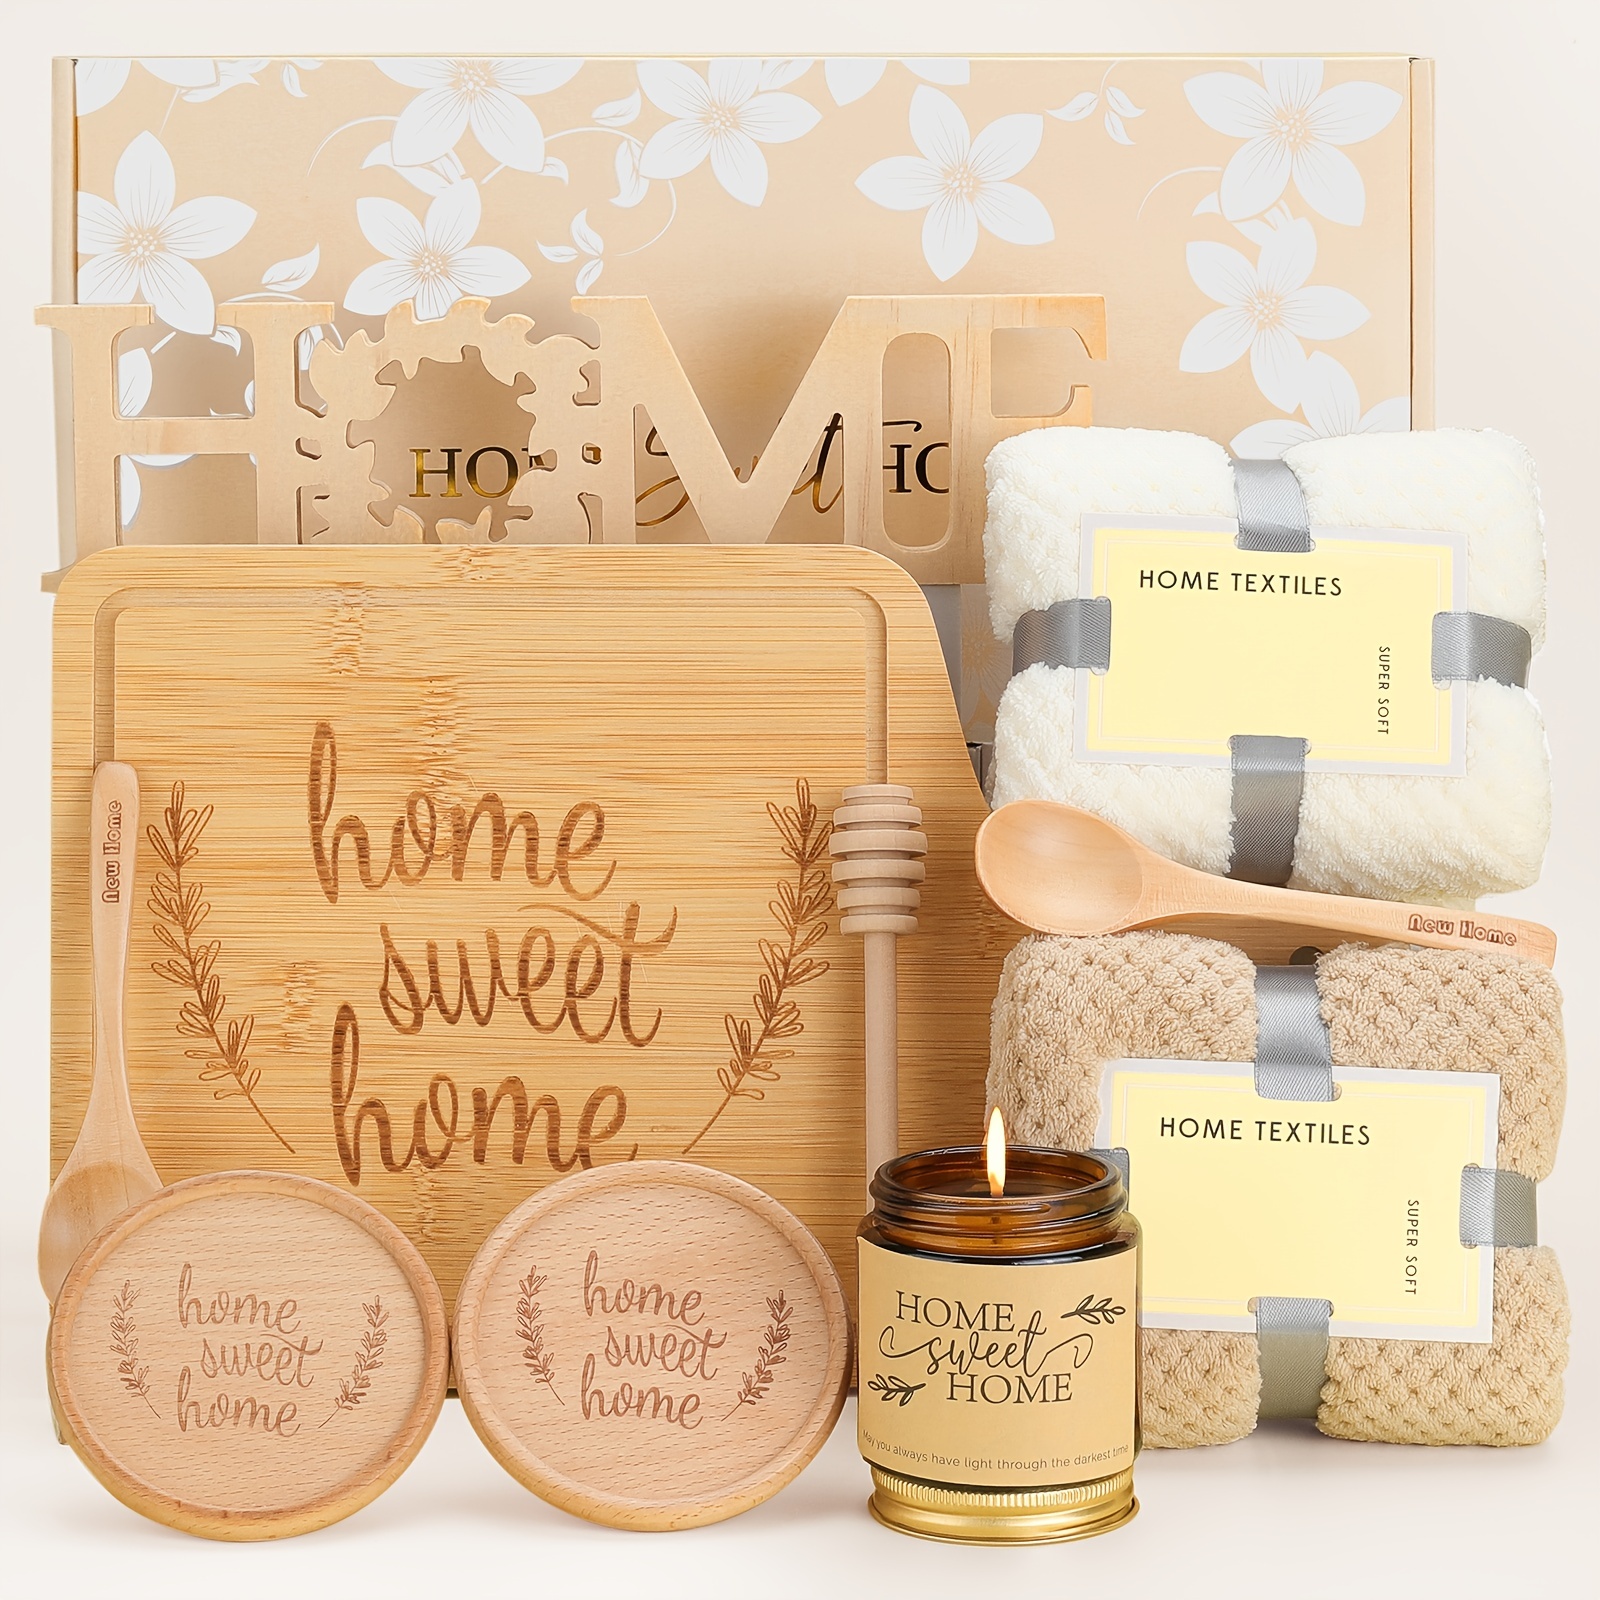 House Warming Gifts New Home - Housewarming Gifts for New House, House  Warming Gifts New Home Women - Housewarming Gift Ideas - New Home Gift  Ideas 